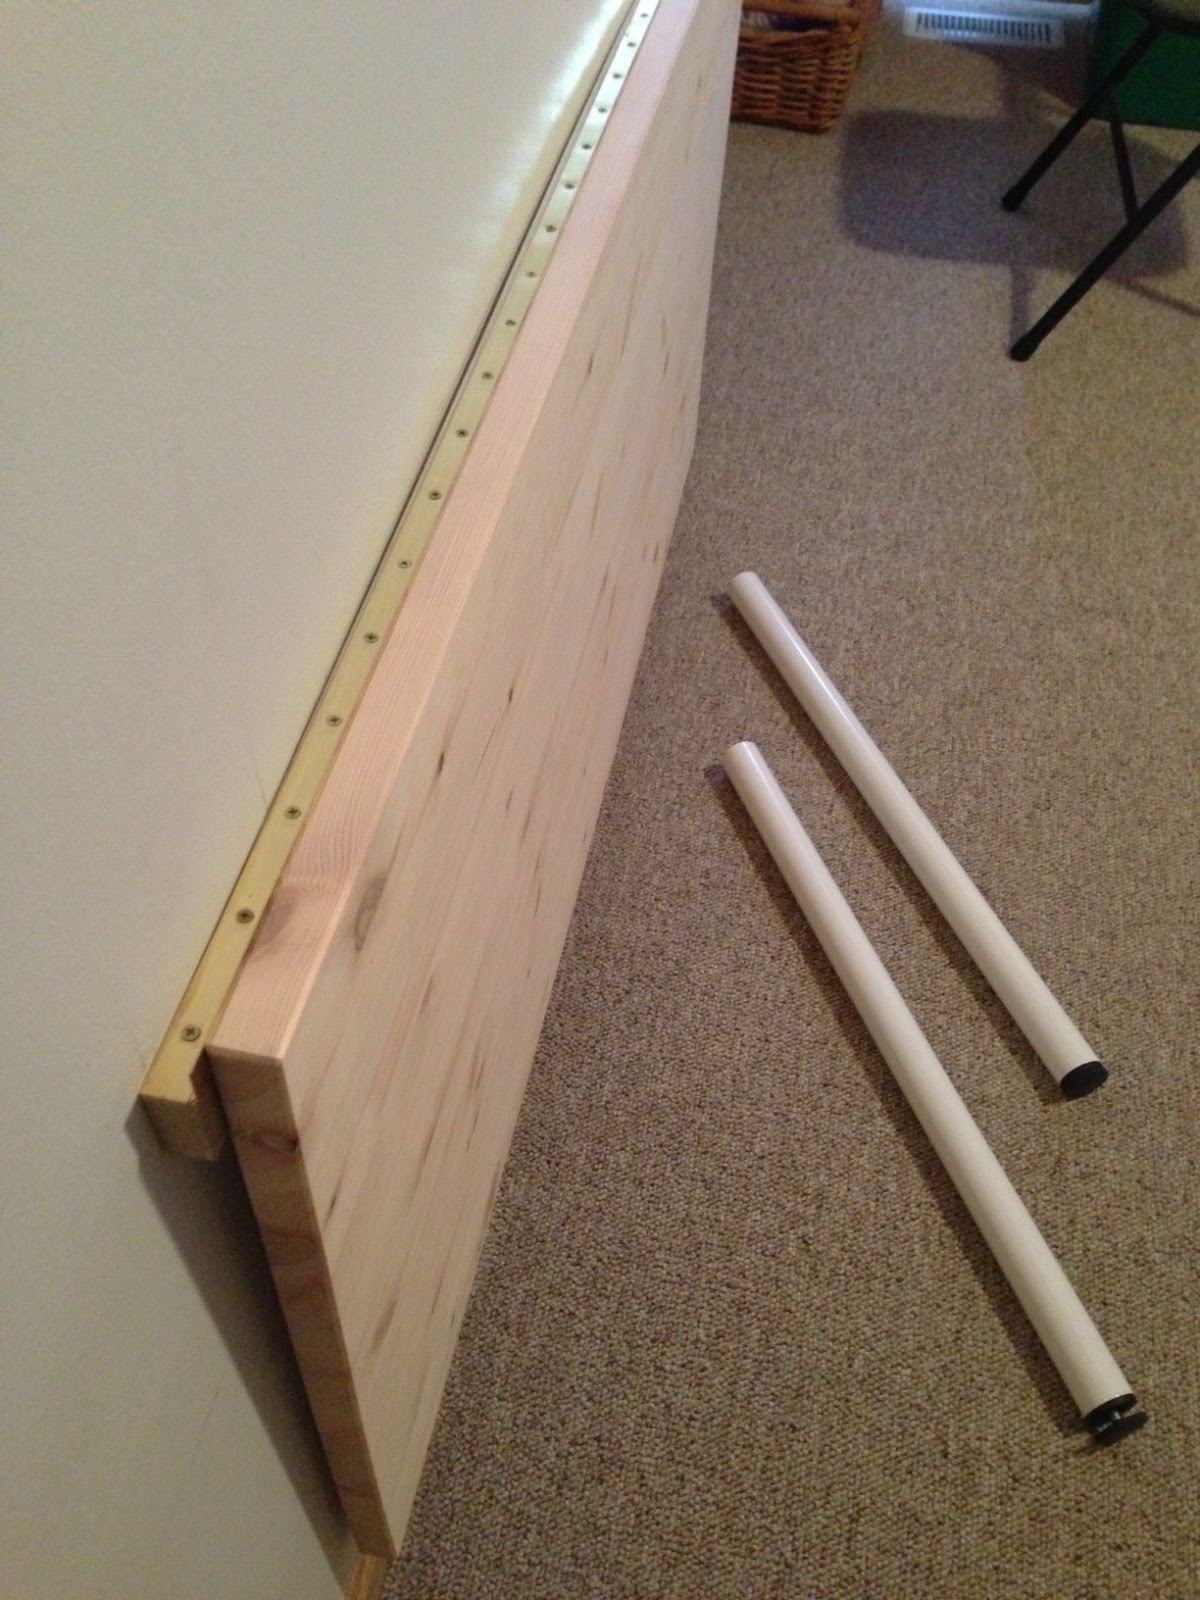 Bill's Fold Down Wall Mounted Desk: How to build a wall ...